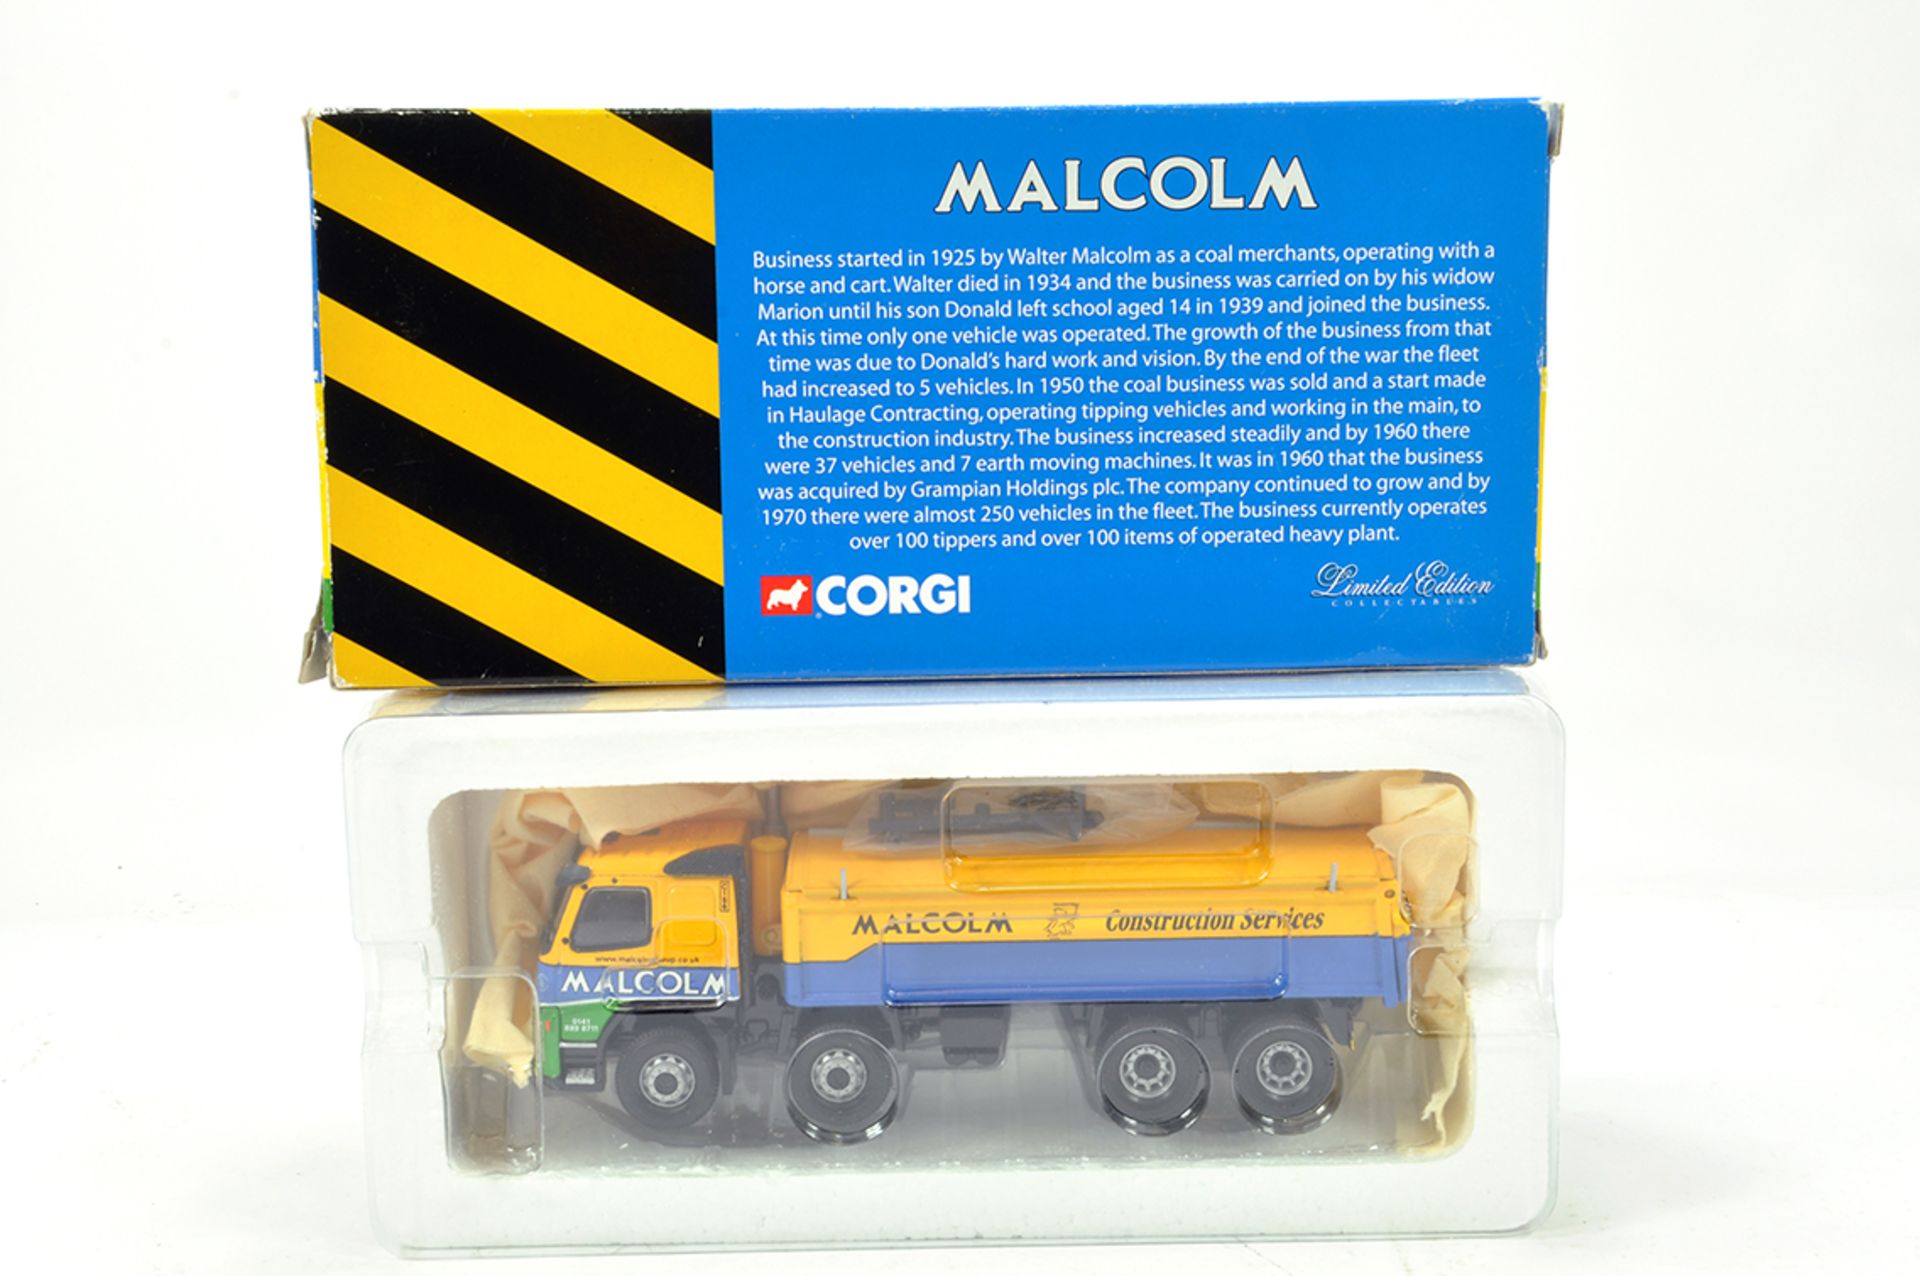 Corgi 1/50 Diecast Truck Issue Comprising CC13504 Volvo FM Tipper in livery of Malcolm. NM to M in